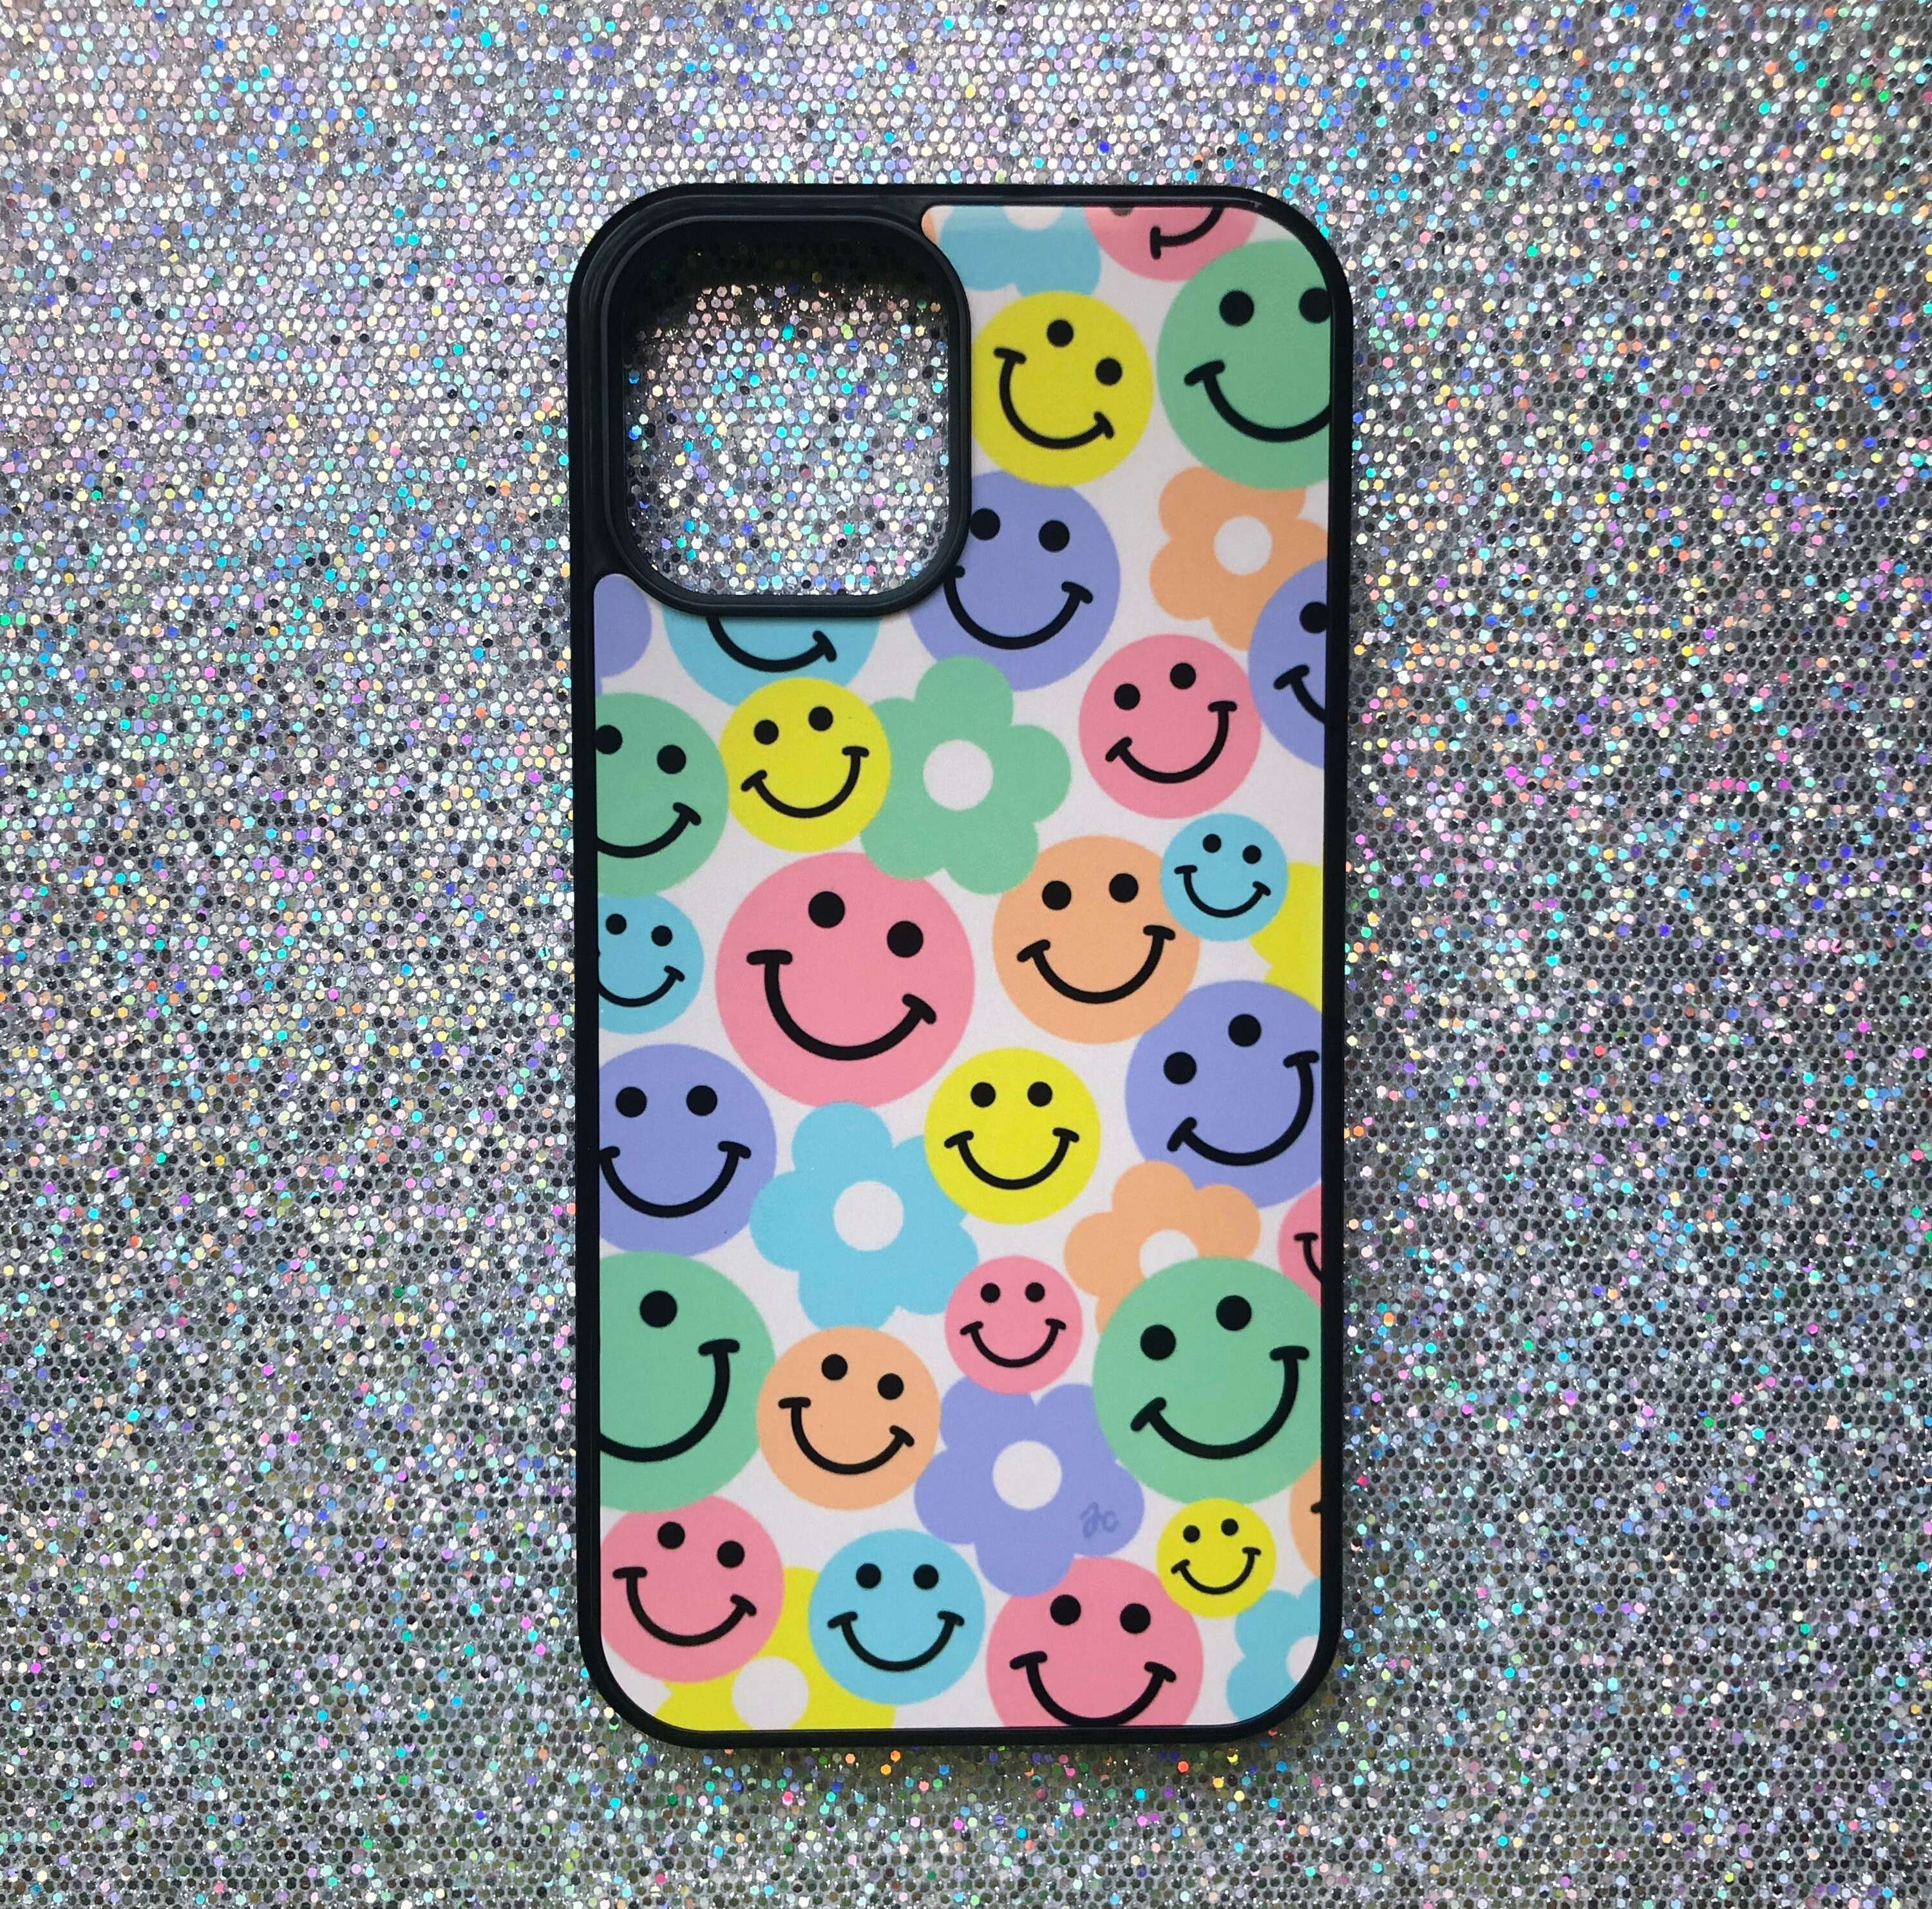 VSCO Pink Pastel Smiley Face Phone Case Sage Green,Aesthetic Fun Colorful Flowers iPhone Trendy Blue Rainbow Daisy Happy Preppy